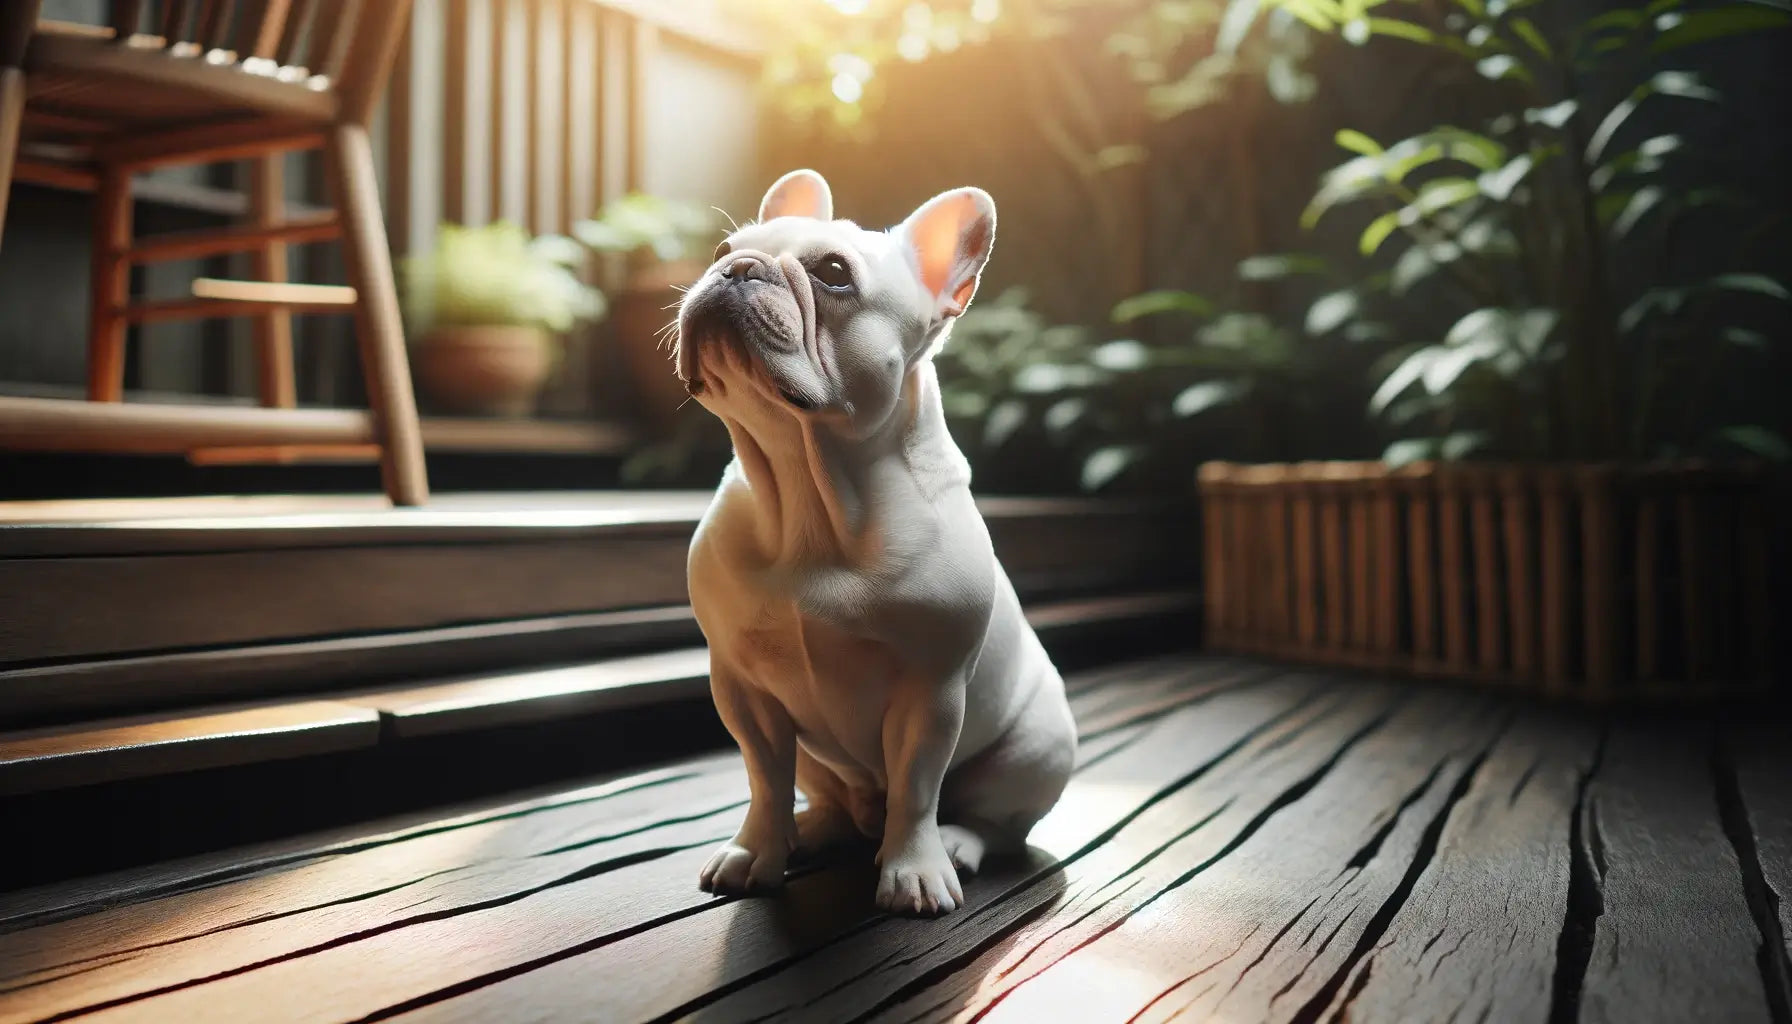 White French Bulldog seated on a wooden deck, looking upwards with a gentle and attentive expression.